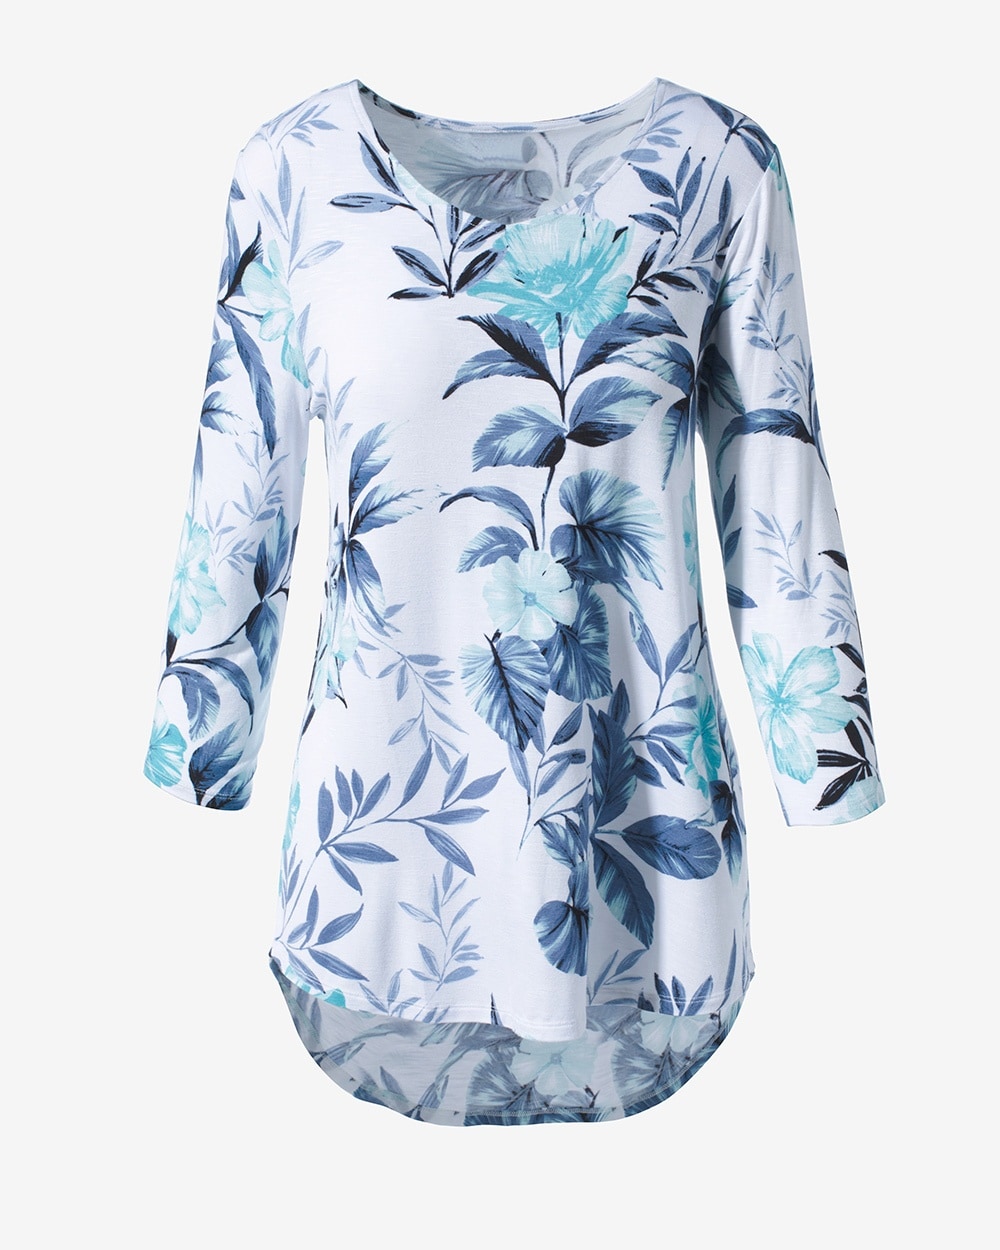 Easywear Tropical Blossoms Hi Low Tee